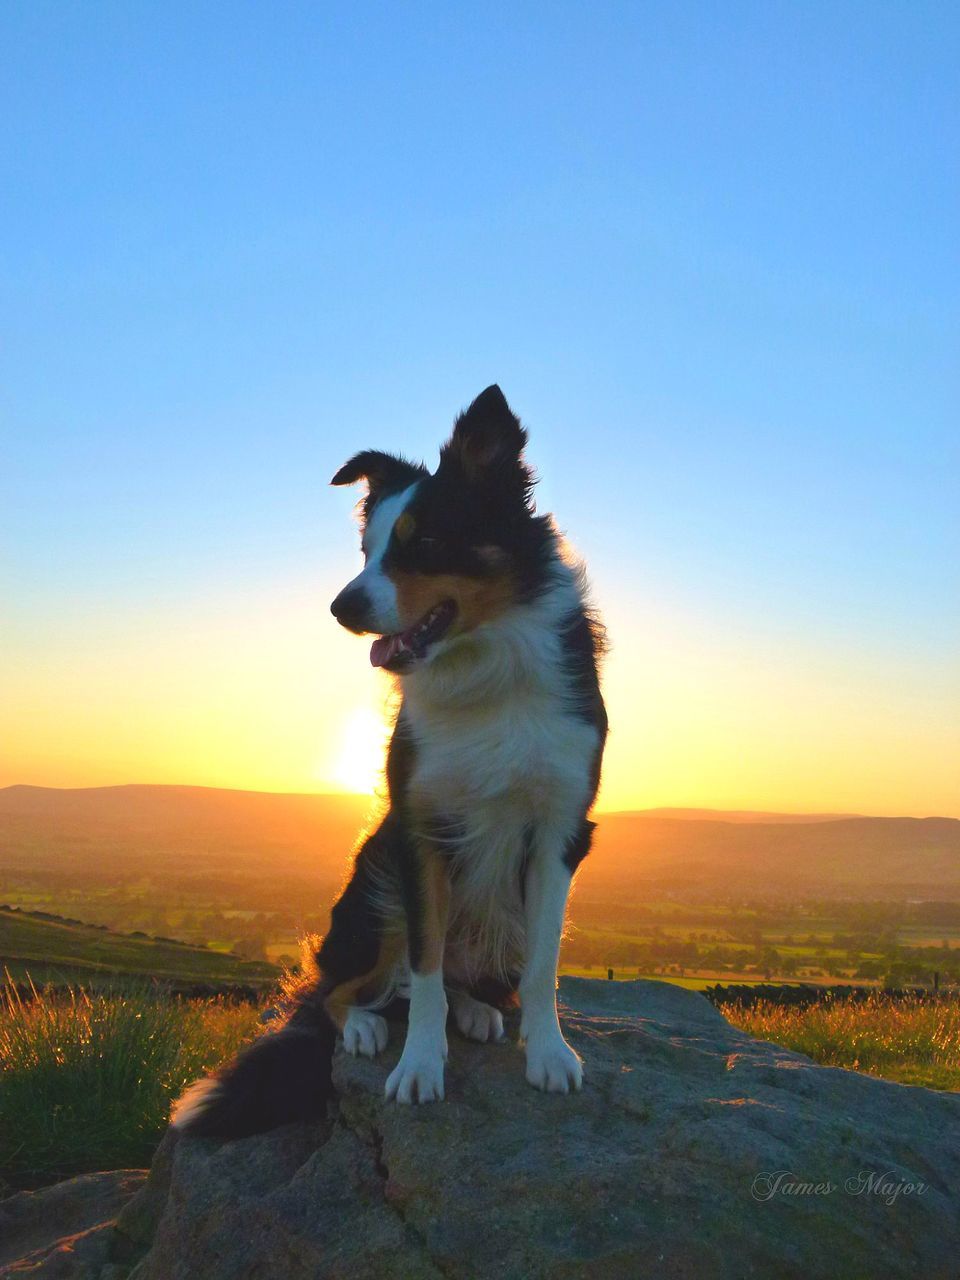 one animal, animal themes, clear sky, copy space, domestic animals, full length, landscape, pets, mammal, sunset, horizon over land, standing, nature, field, blue, looking away, side view, beauty in nature, no people, sunlight